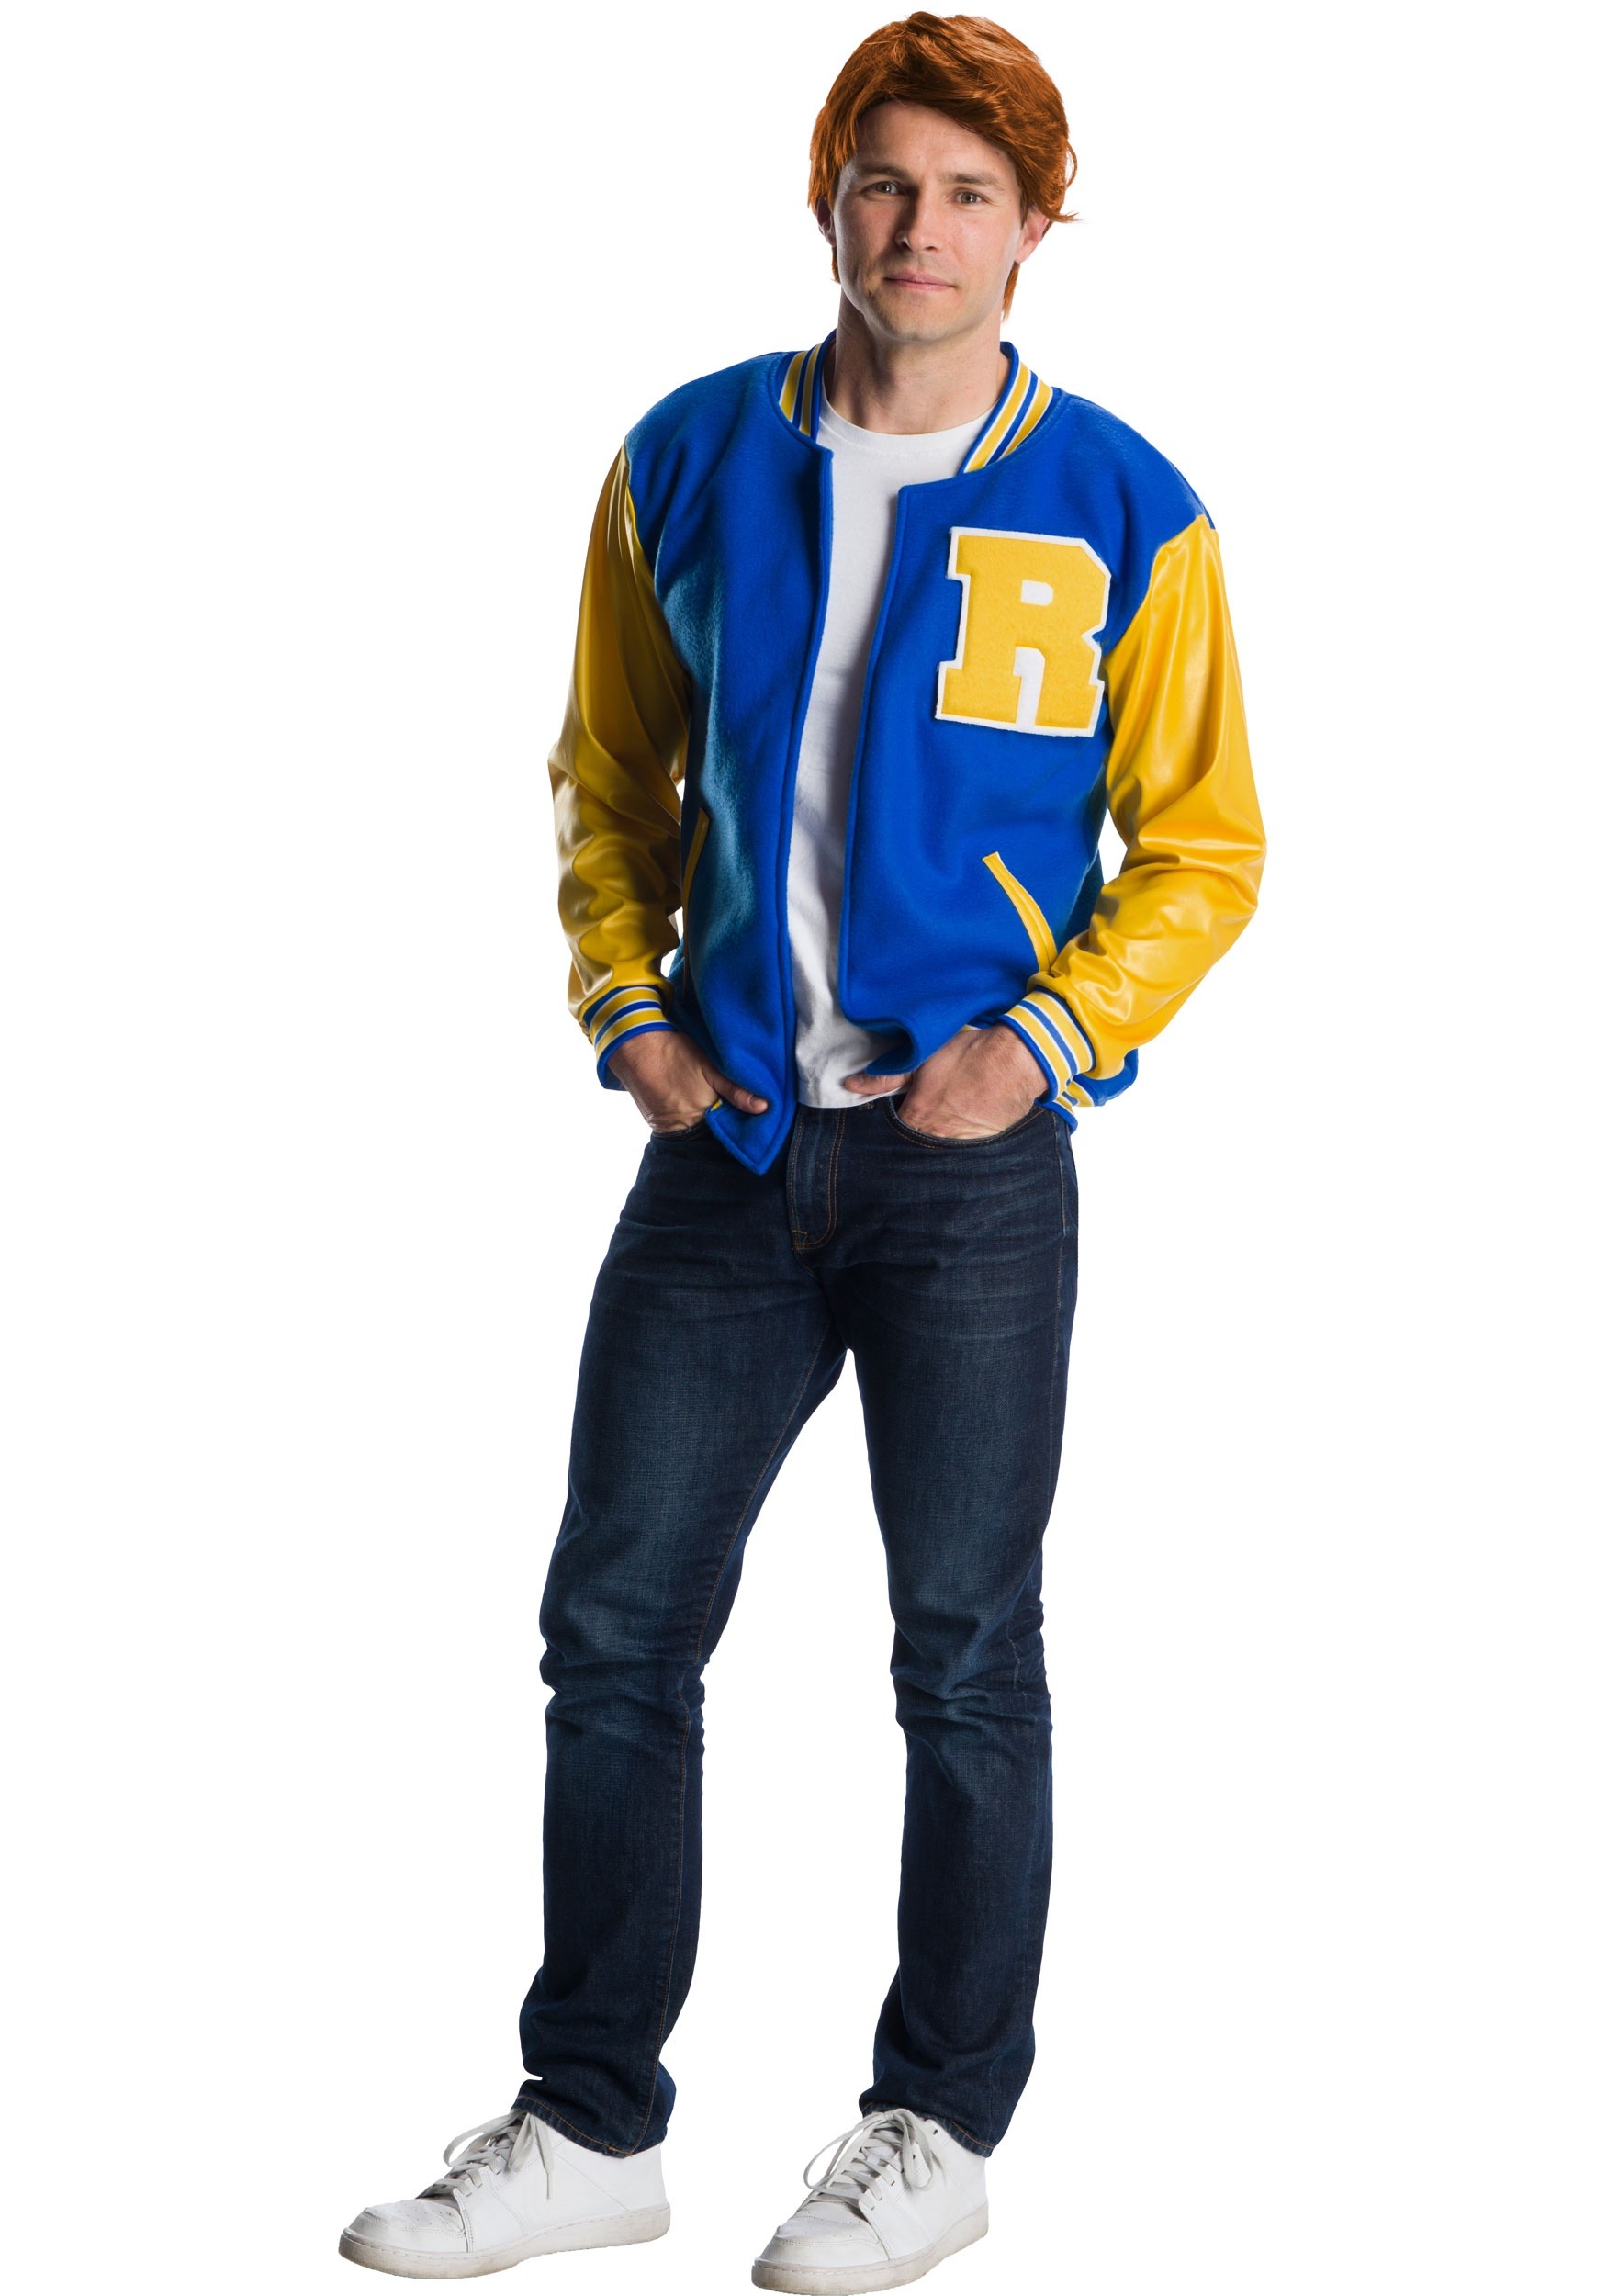 Image of Riverdale Archie Andrews Adult Costume ID RU700027-ST